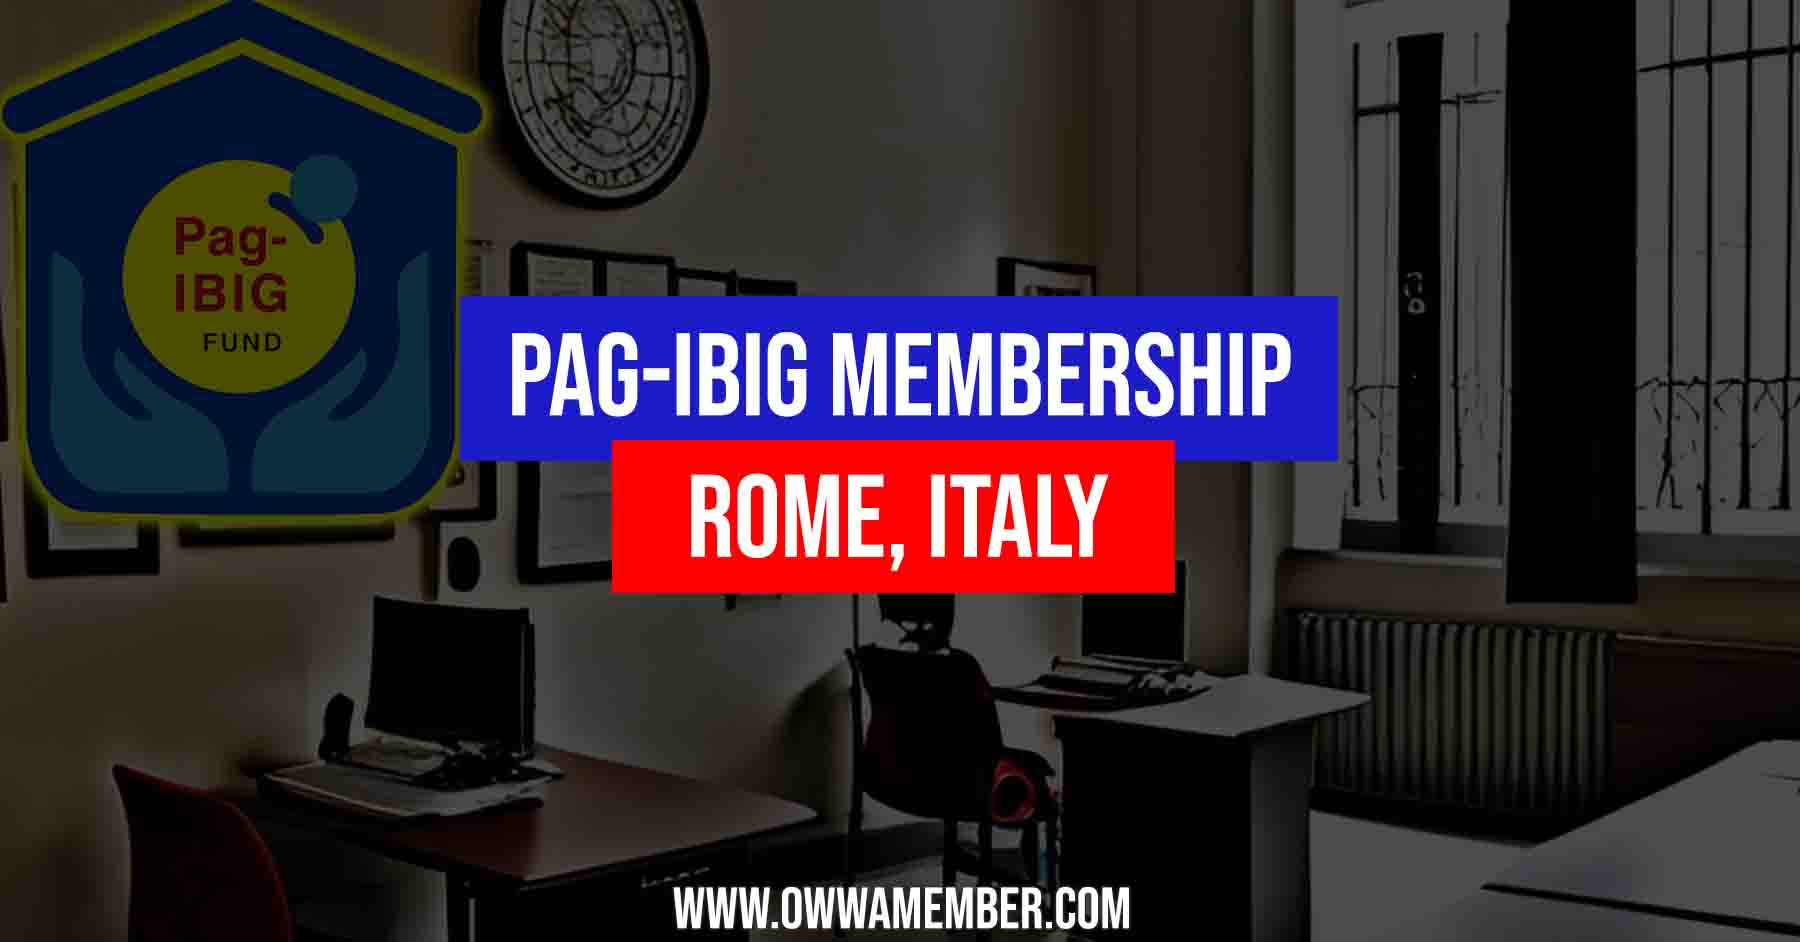 pagibig membership for ofws in rome italy